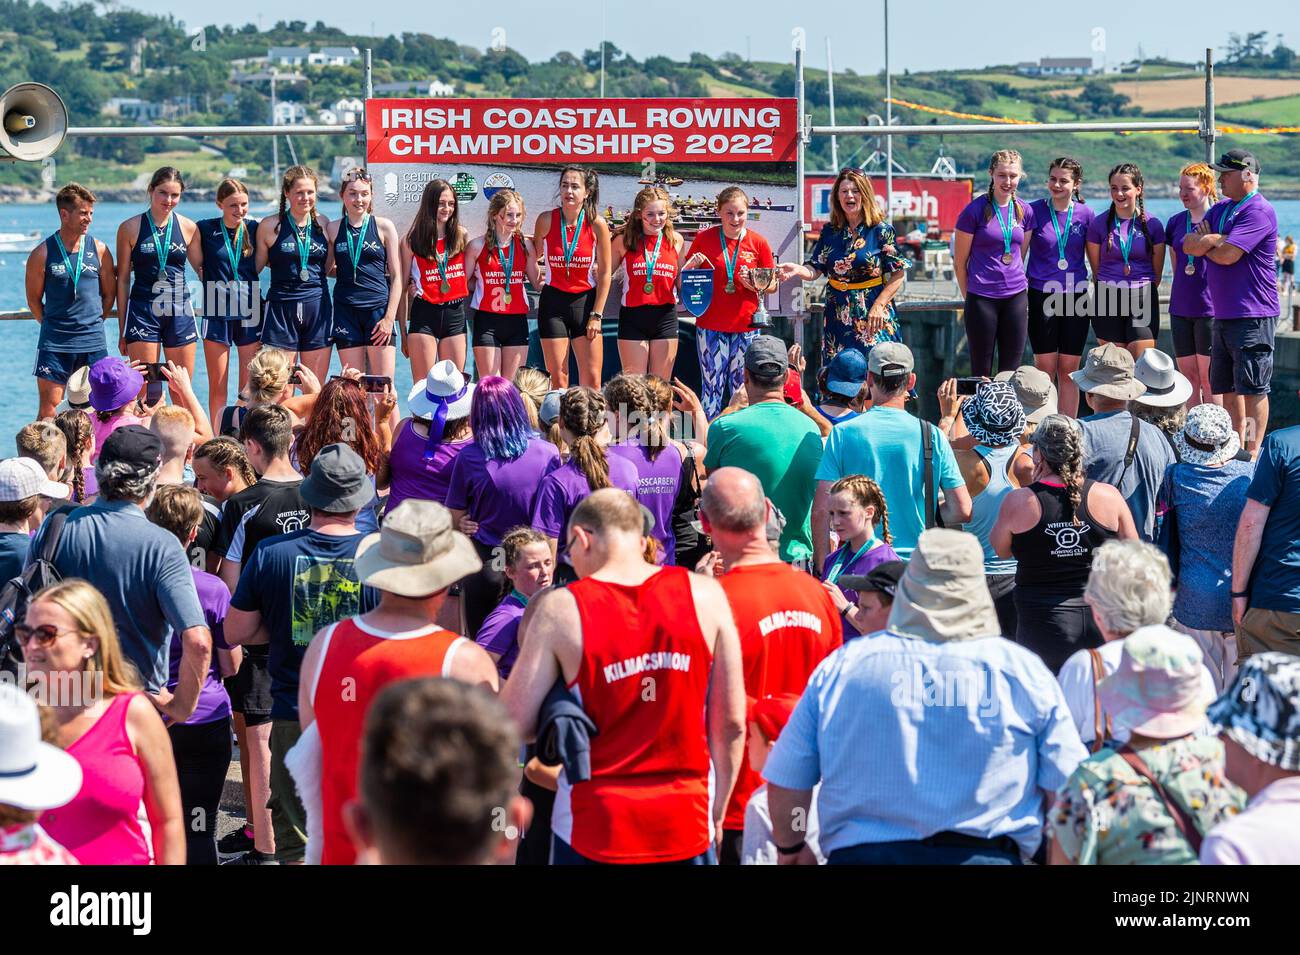 Schull, West Cork, Ireland. 13th Aug, 2022. The 2022 Irish Coastal Rowing Championships is taking place this weekend in Schull, West Cork. A total of 290 crews from different clubs are taking part in the event which finishes Sunday evening. Presentations took place on Schull Pier and drew a big crowd of spectators. Credit: AG News/Alamy Live News Stock Photo